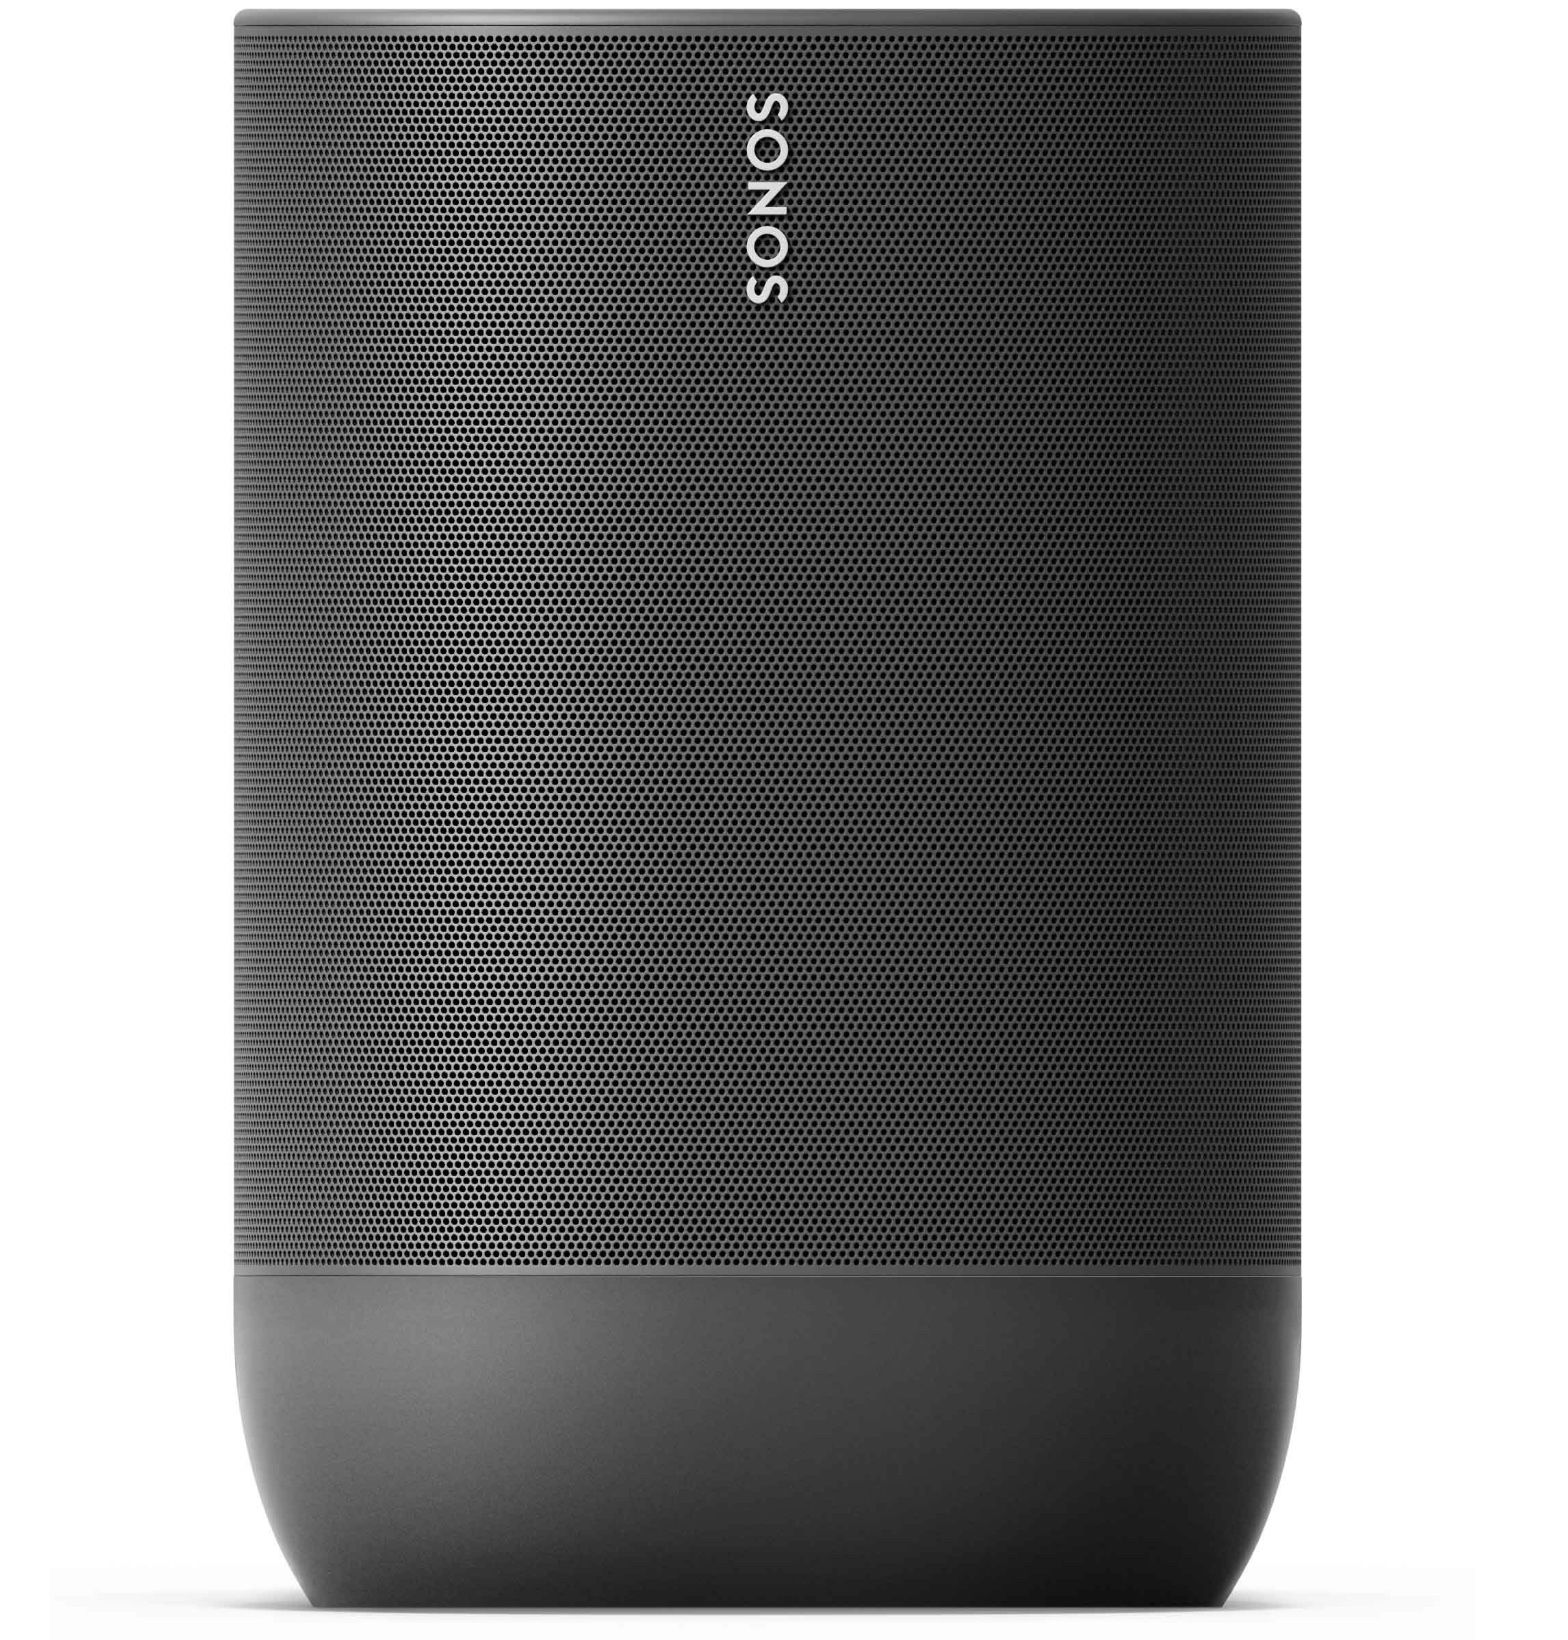 Sonos Move - Battery-powered Smart Speaker, Wi-Fi and Bluetooth with Alexa built-in - Black​​​​​